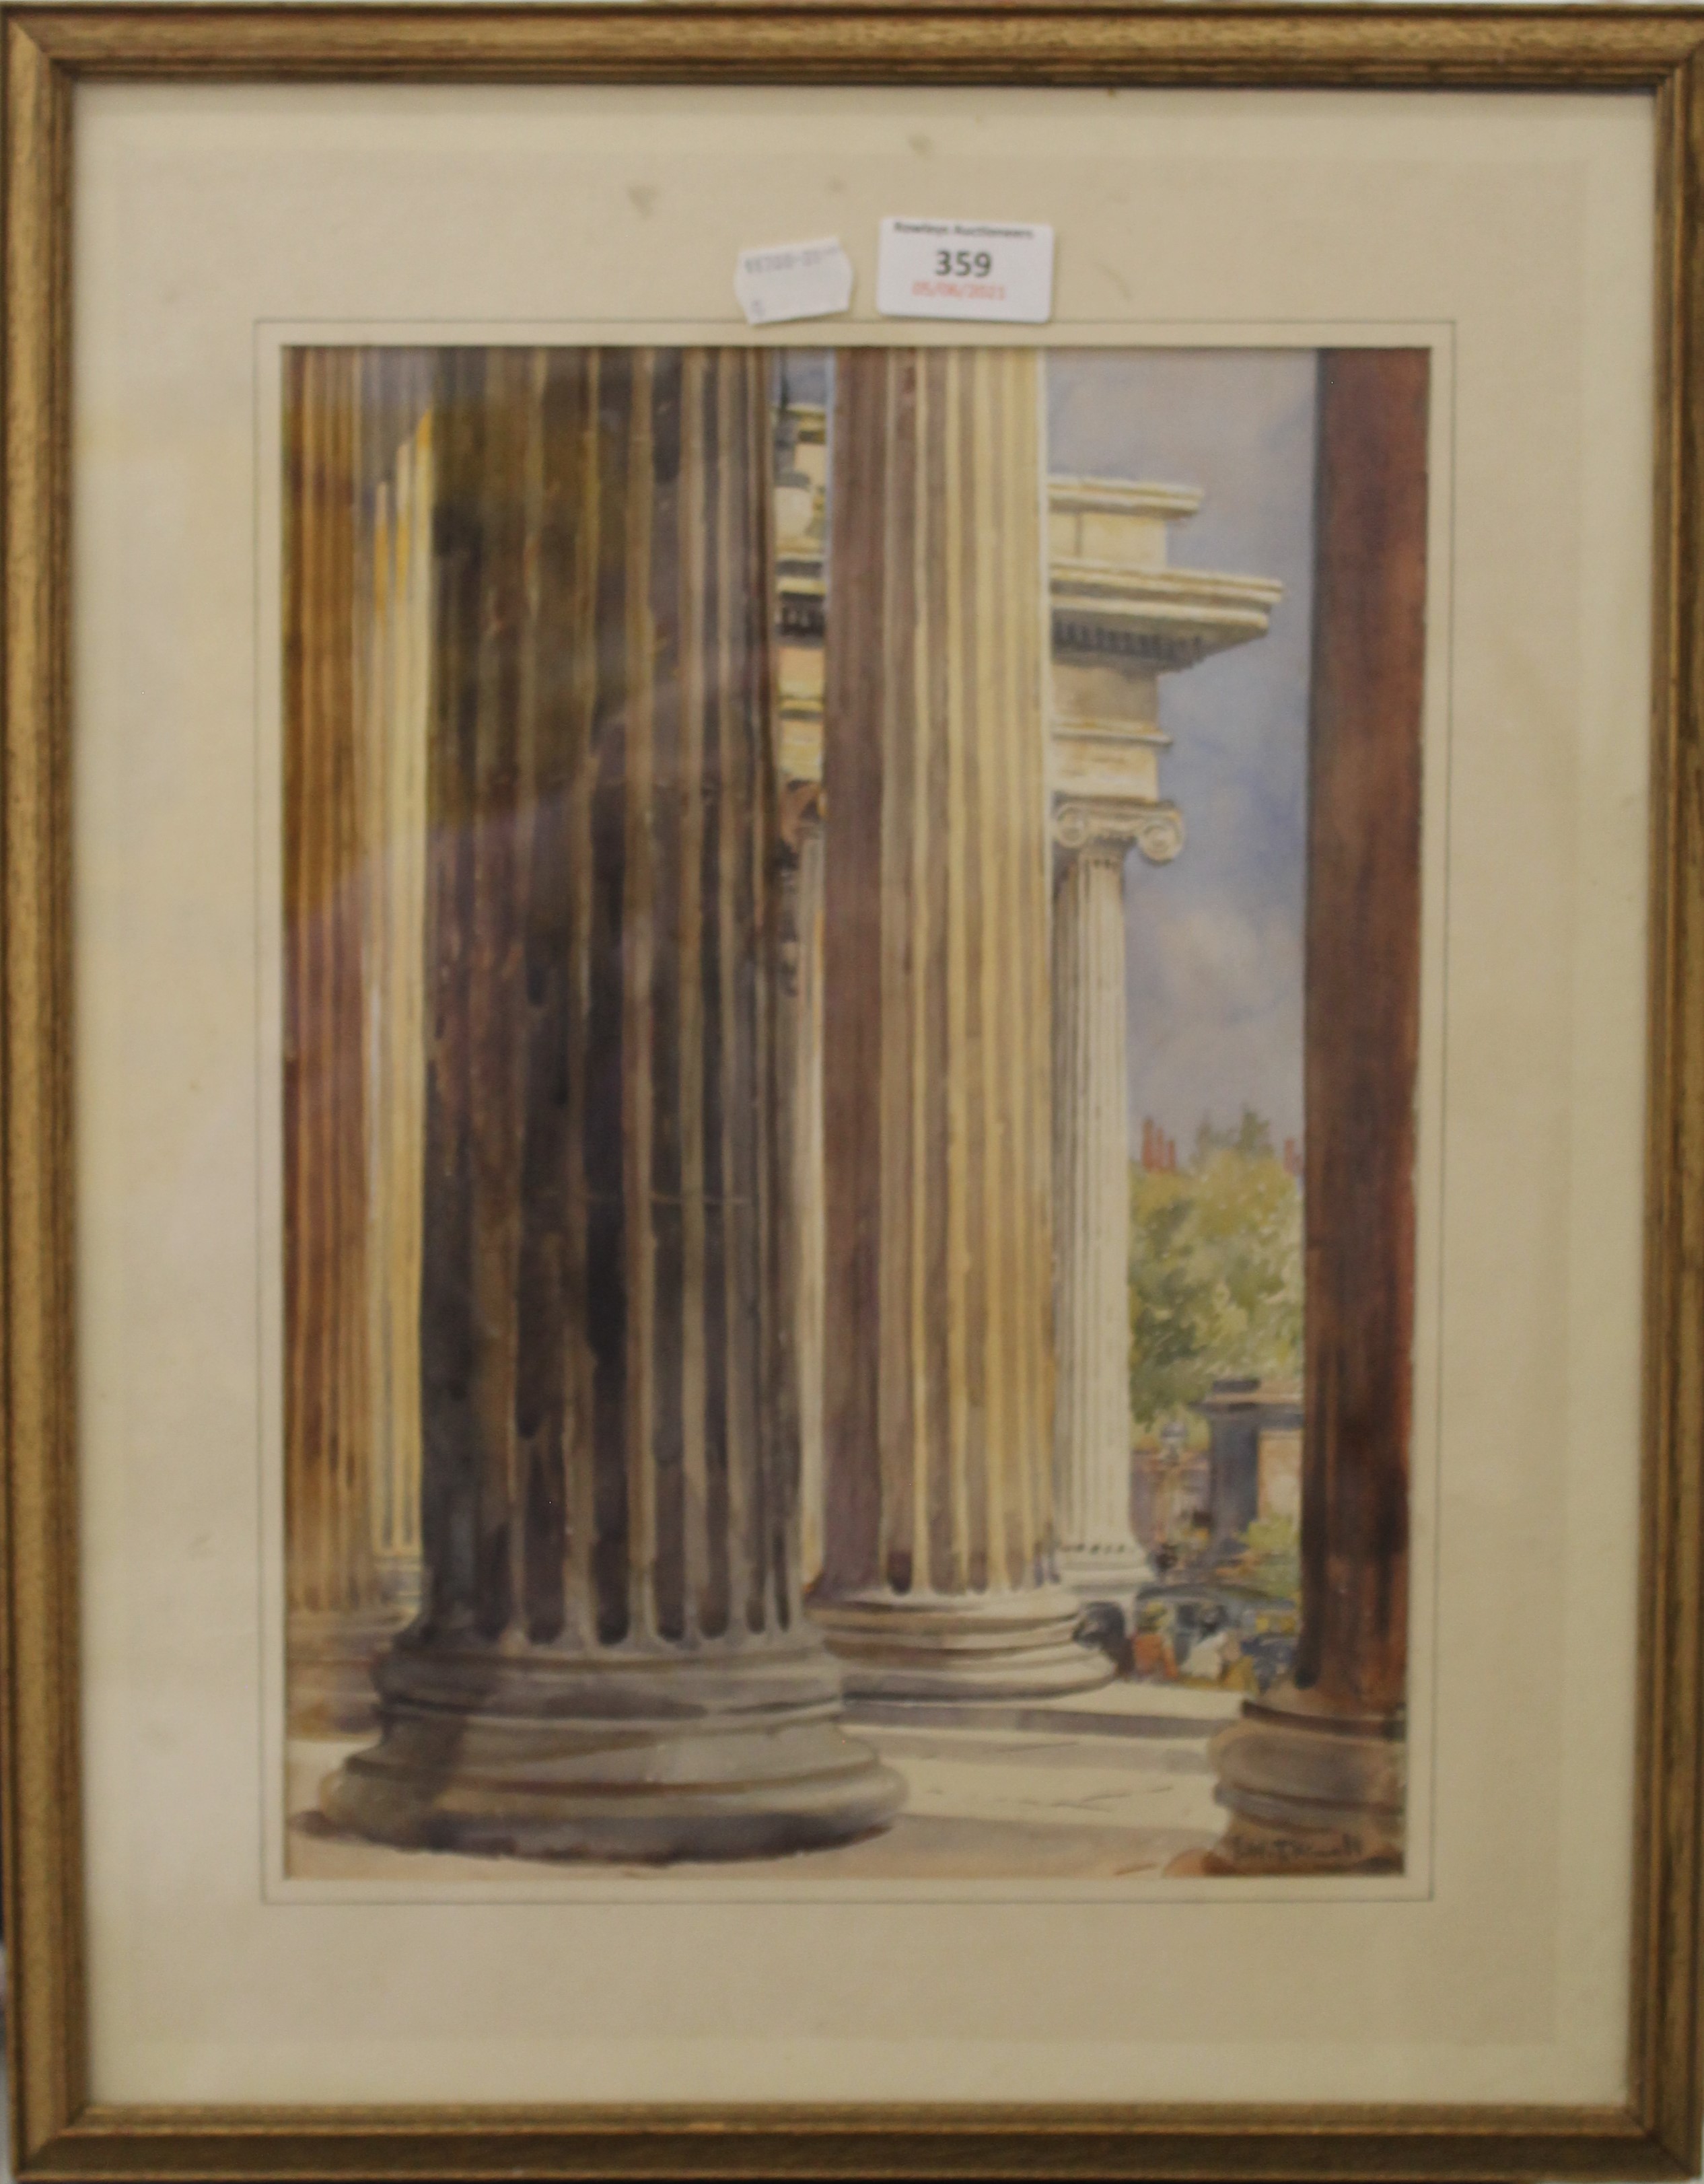 J W T VITALLI, Portico of British Museum, watercolour, signed, framed and glazed. 25 x 34 cm. - Image 2 of 3